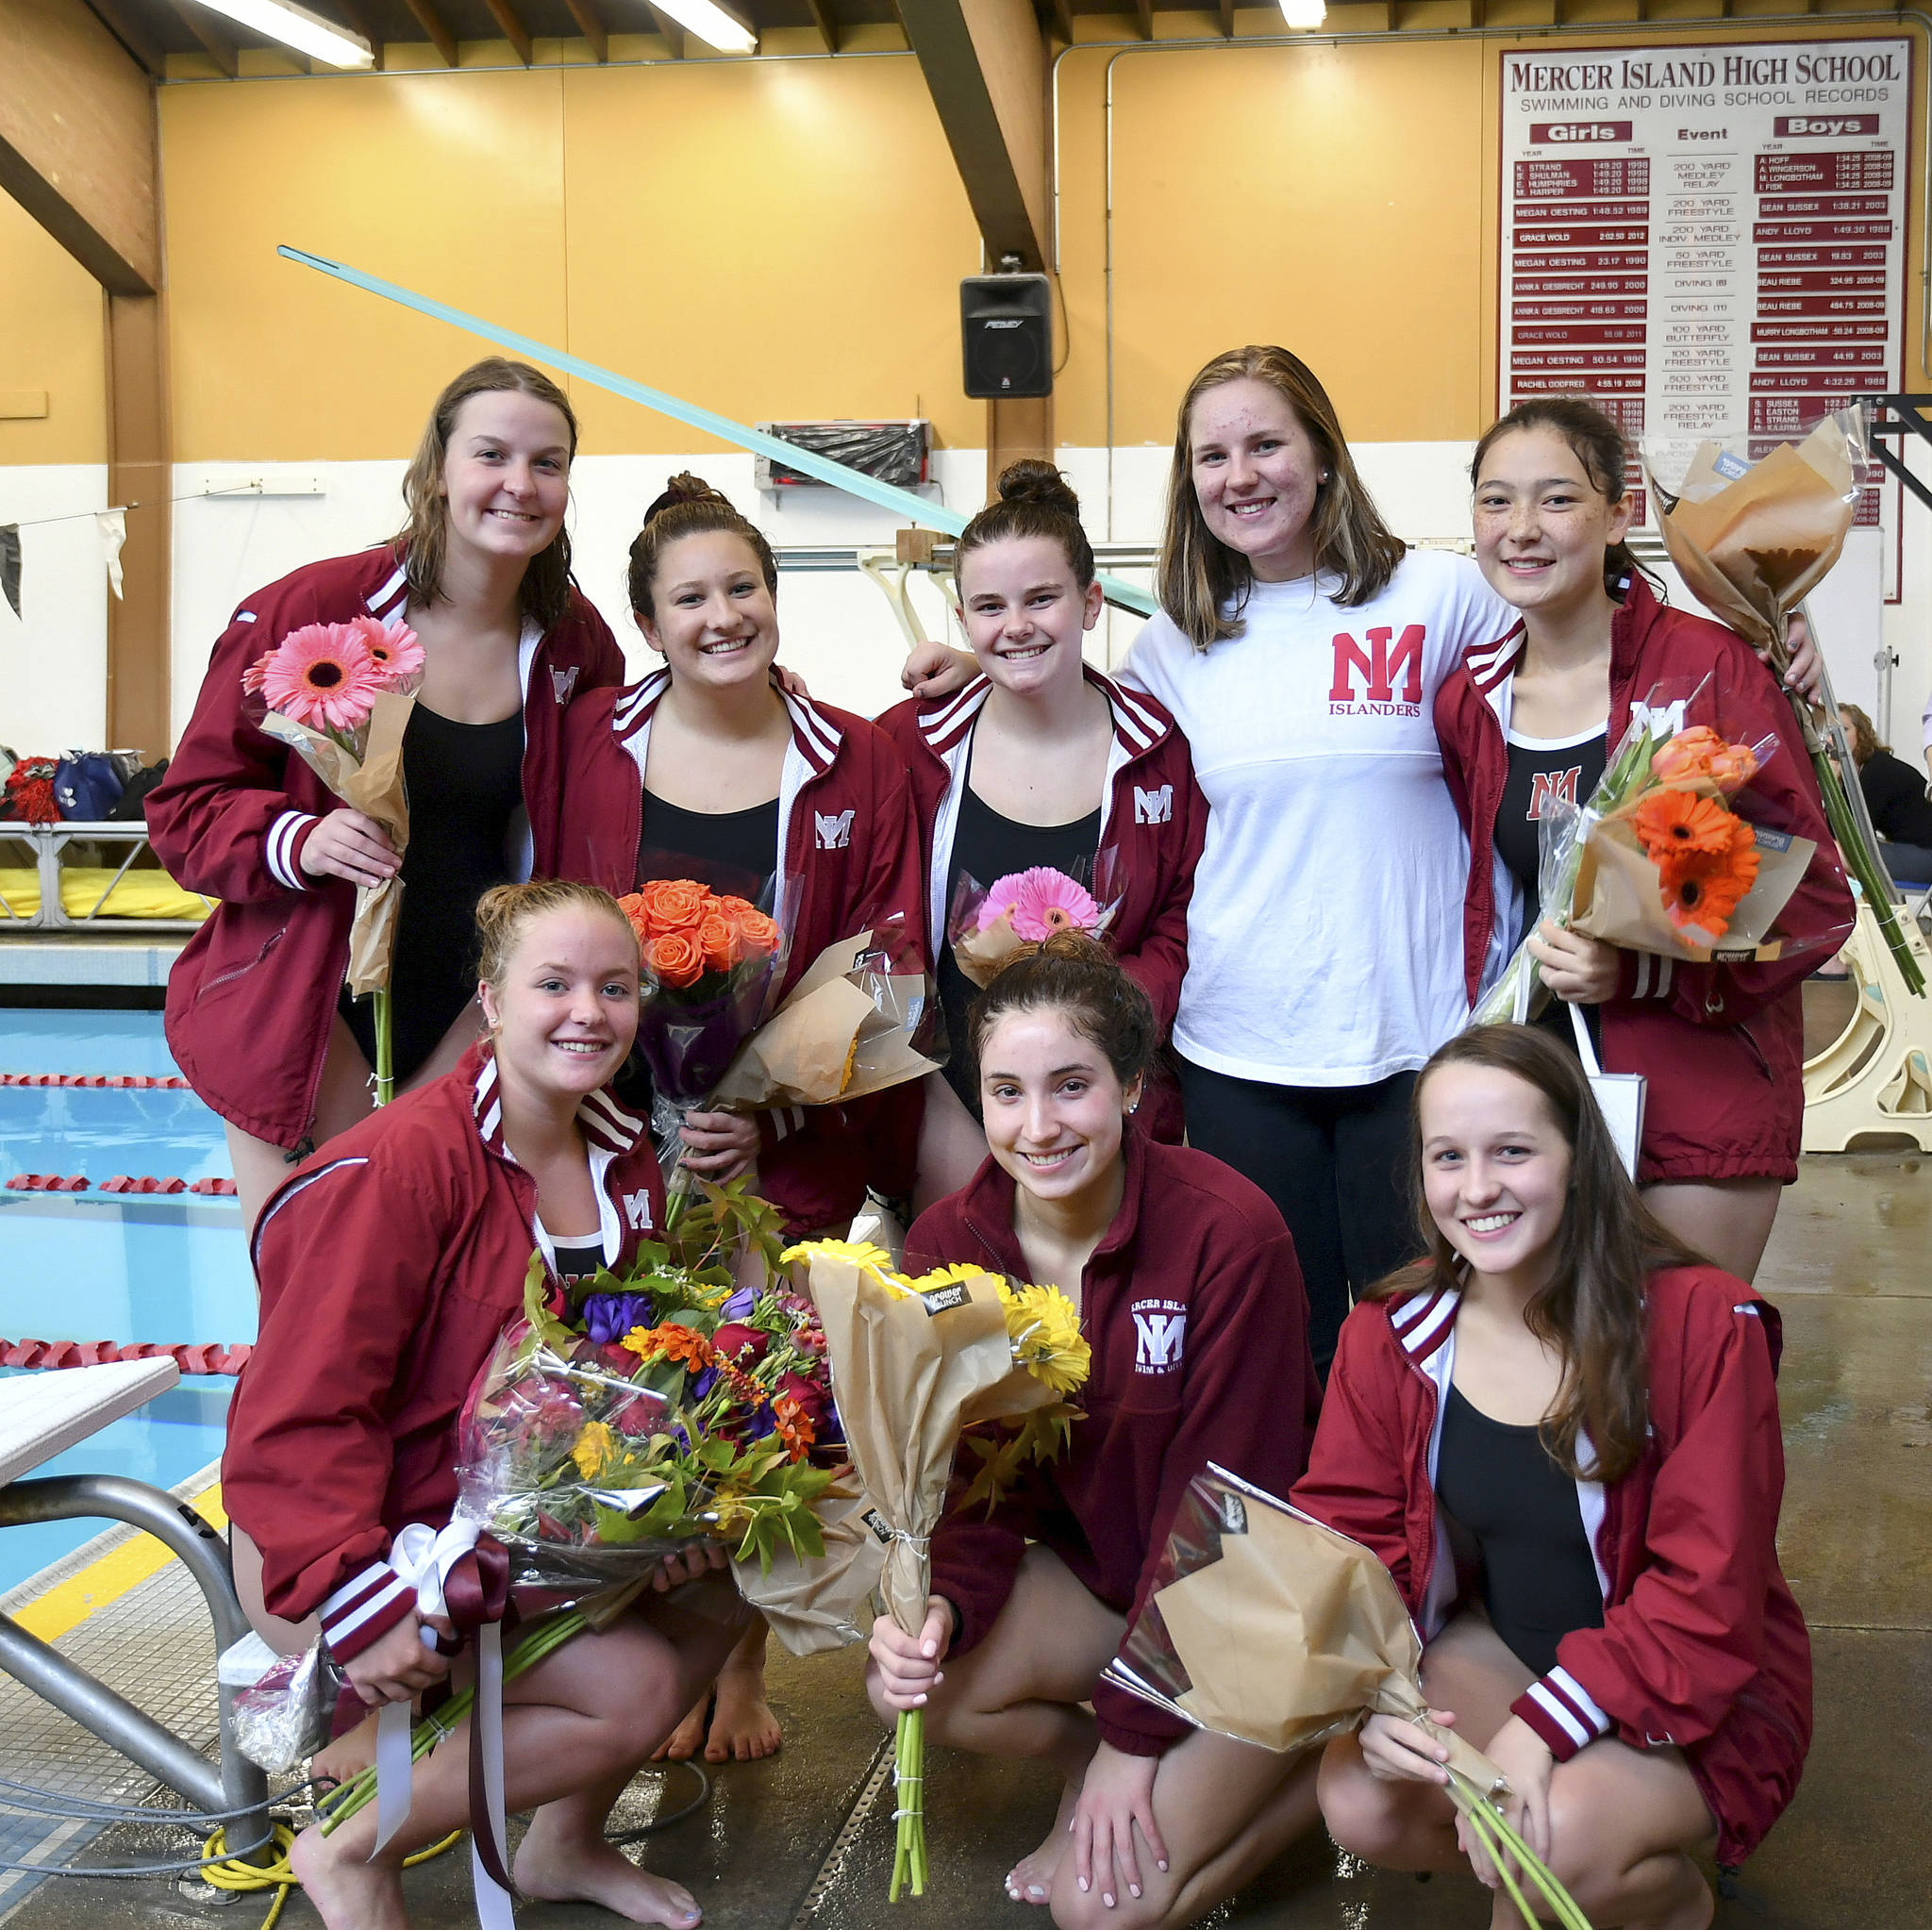 Photo courtesy of Allison Needles                                Mercer Island girls swim team seniors Tess Ritcey, Lauren Ralph, Caroline Harkins, Landon Cobbs, Kathryn Ristuben, Taylor Winnie, Ellie Williams and Haley Crowther gathered for a picture before the Islanders competed against the Sammamish Totems on senior night, Oct. 12. Mercer Island defeated Sammamish 127-58 in the meet. The Islanders improved their overall record to 7-0 with the win.                                Mercer Island athletes capturing first place against the Totems consisted of Sophia McGuffin (1-meter dive), Alexandra Williams (200 medley relay), Annie Pearse (200 medley relay, 200 free relay, 200 IM, 100 breaststroke), Mira Tang (200 medley relay) Julia Williamson (200 medley relay), Chloe Mark (200 free relay, 200 free), Elizabeth Bailey (200 free relay), Hailey Vandenbosch (200 free relay, 50 free), Ellie Nomicos (500 free), Ritcey (400 free relay), Harkins (400 free relay), Williams (400 free relay) and Ralph (400 free relay).